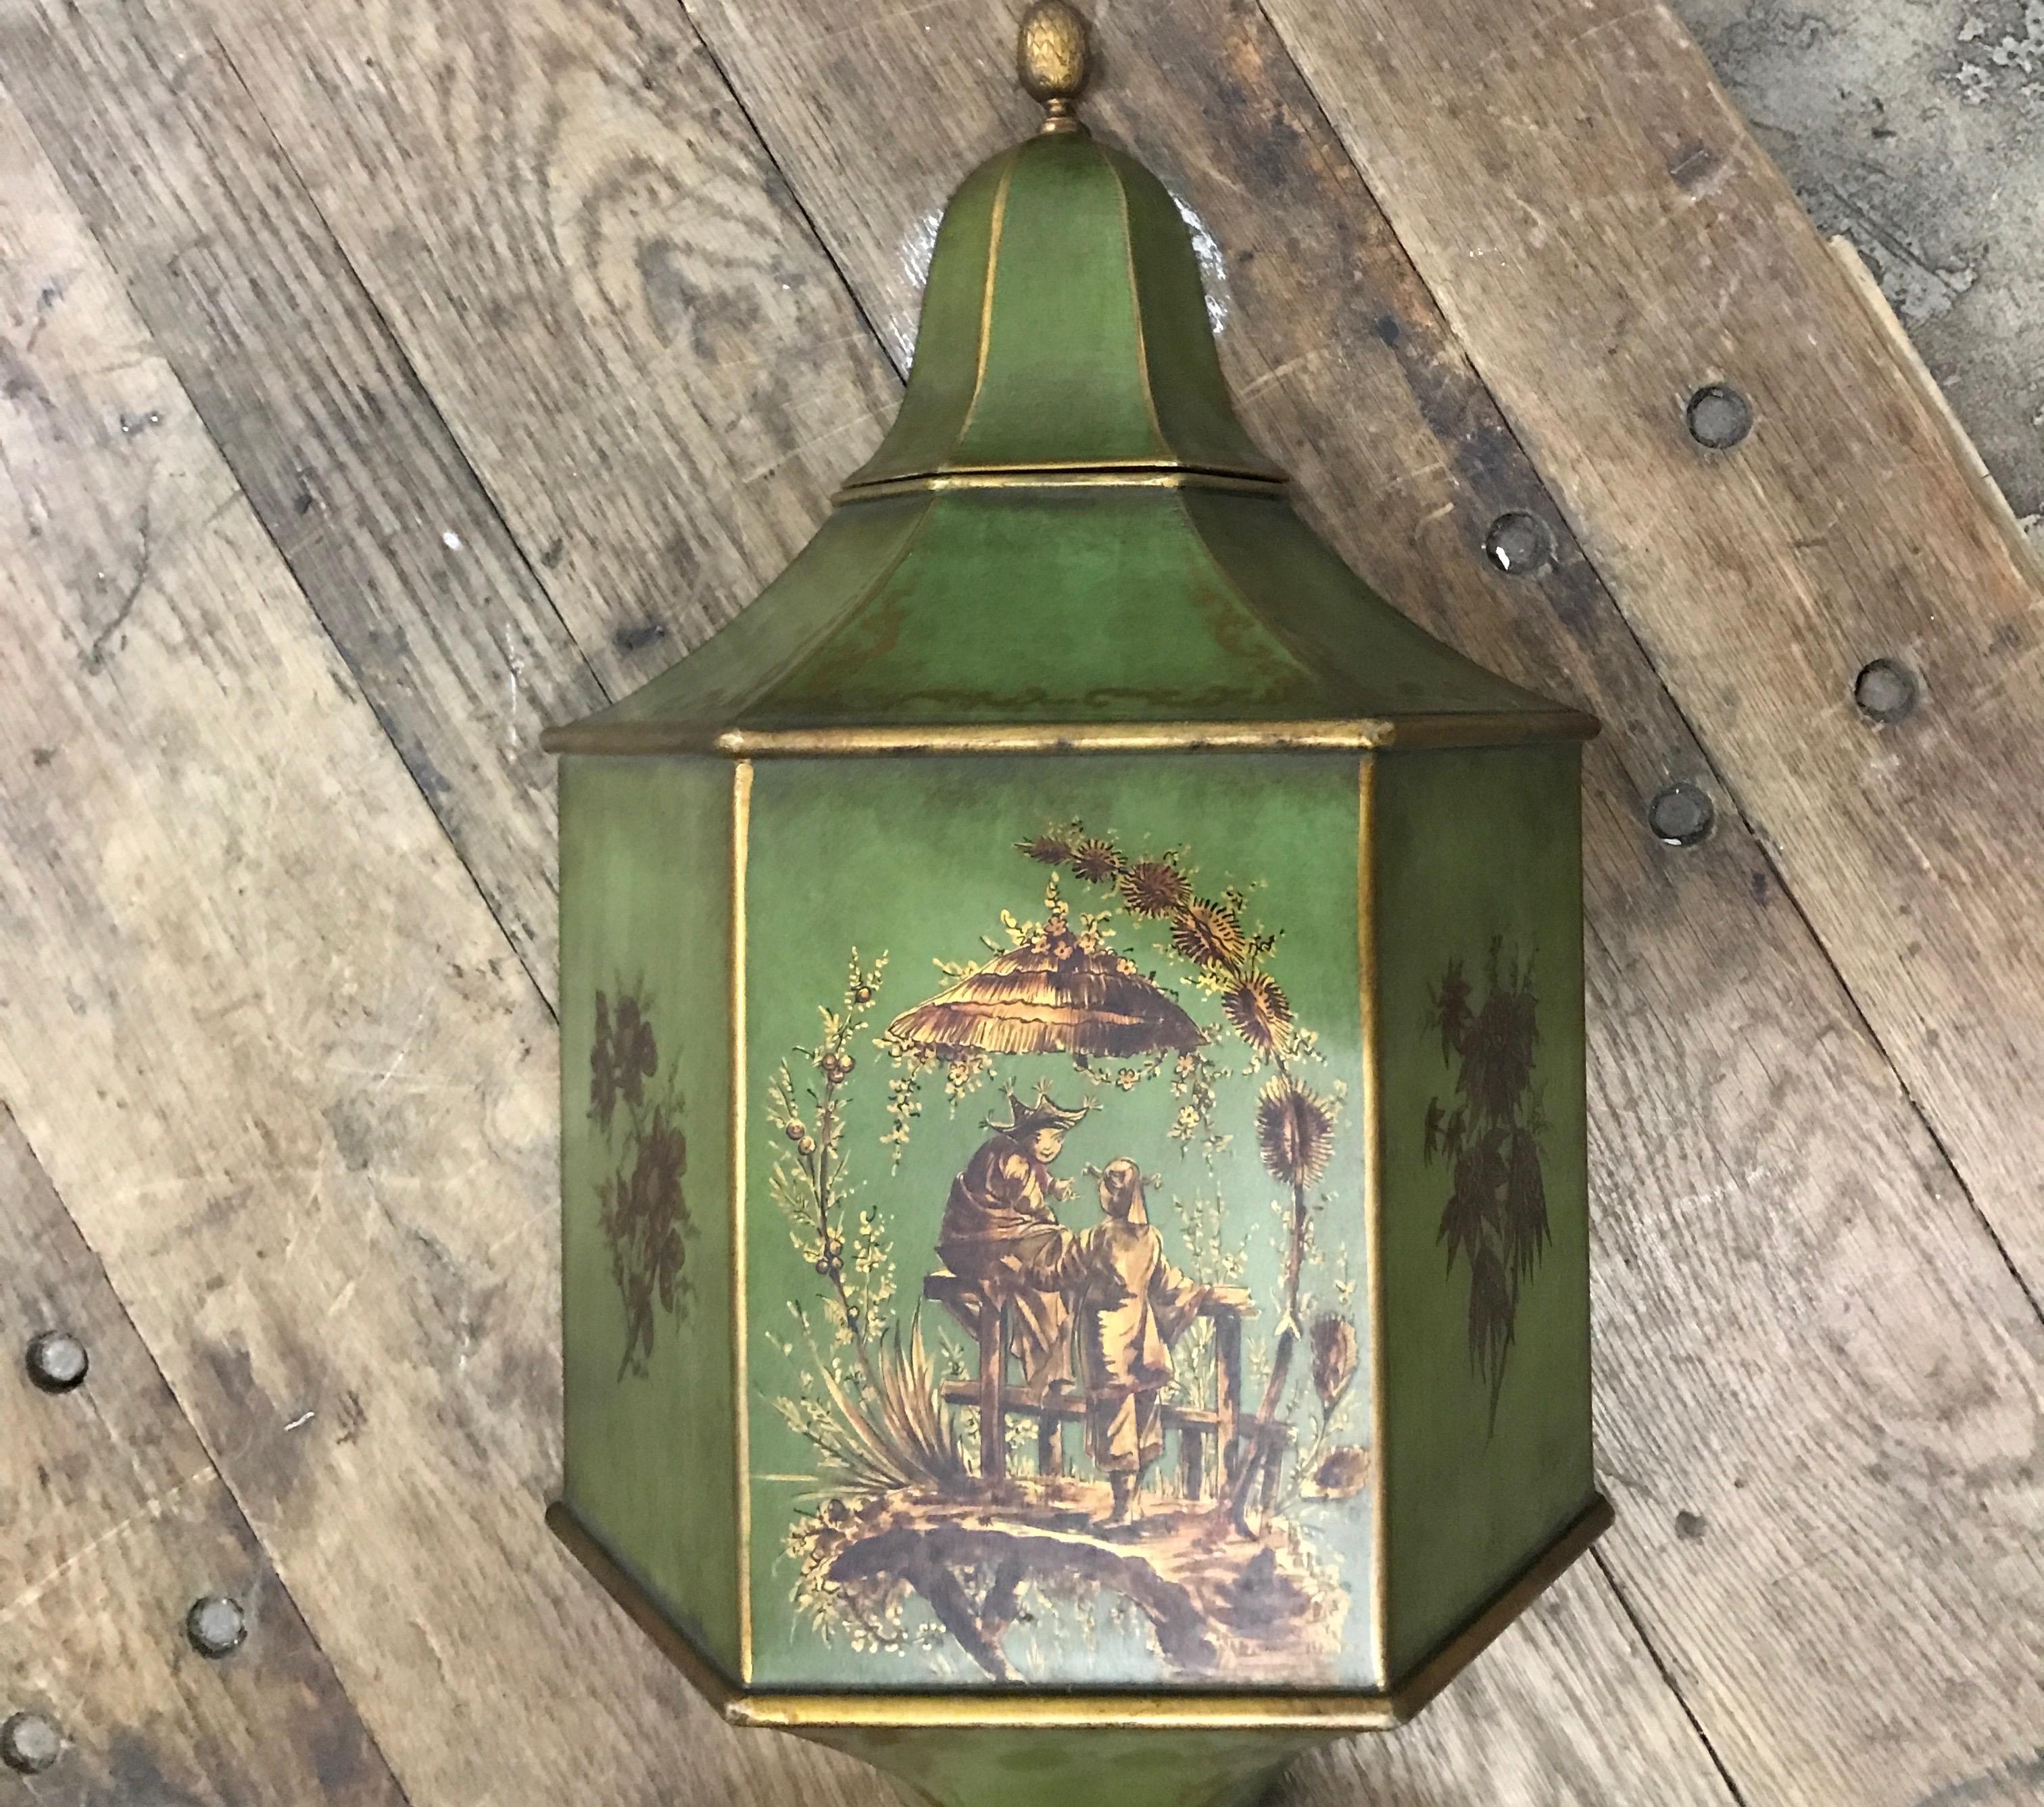 Very decorative chinoiserie tole lavabo. Beautifully hand painted lavabo with a lush green background with brown and gold details. Top lid is finished with an acorn.